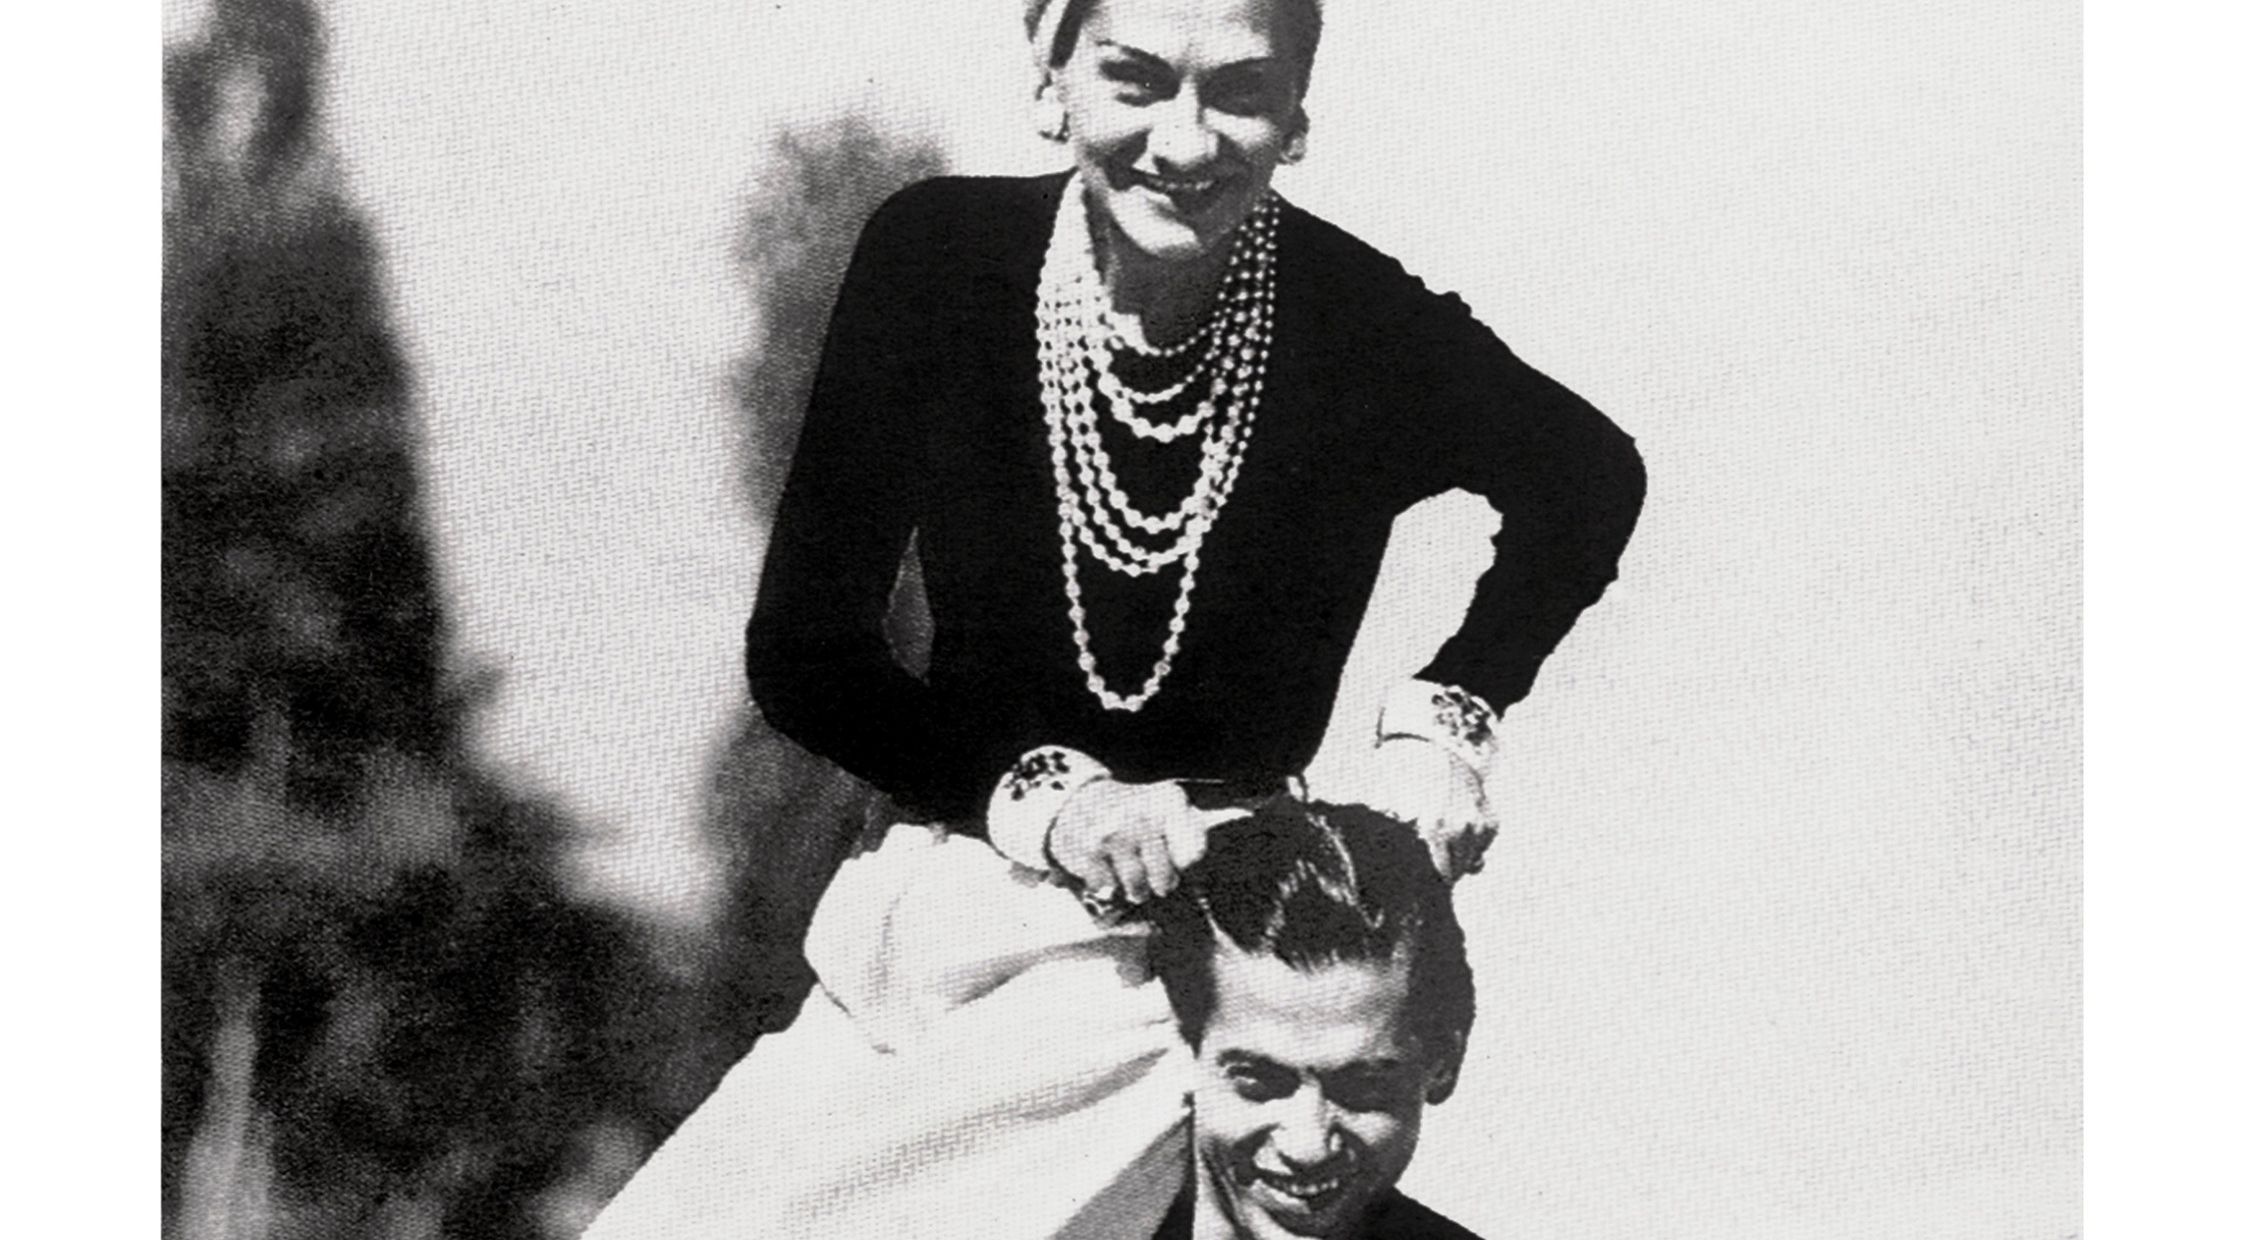 The story of the great love affair between Coco Chanel and the